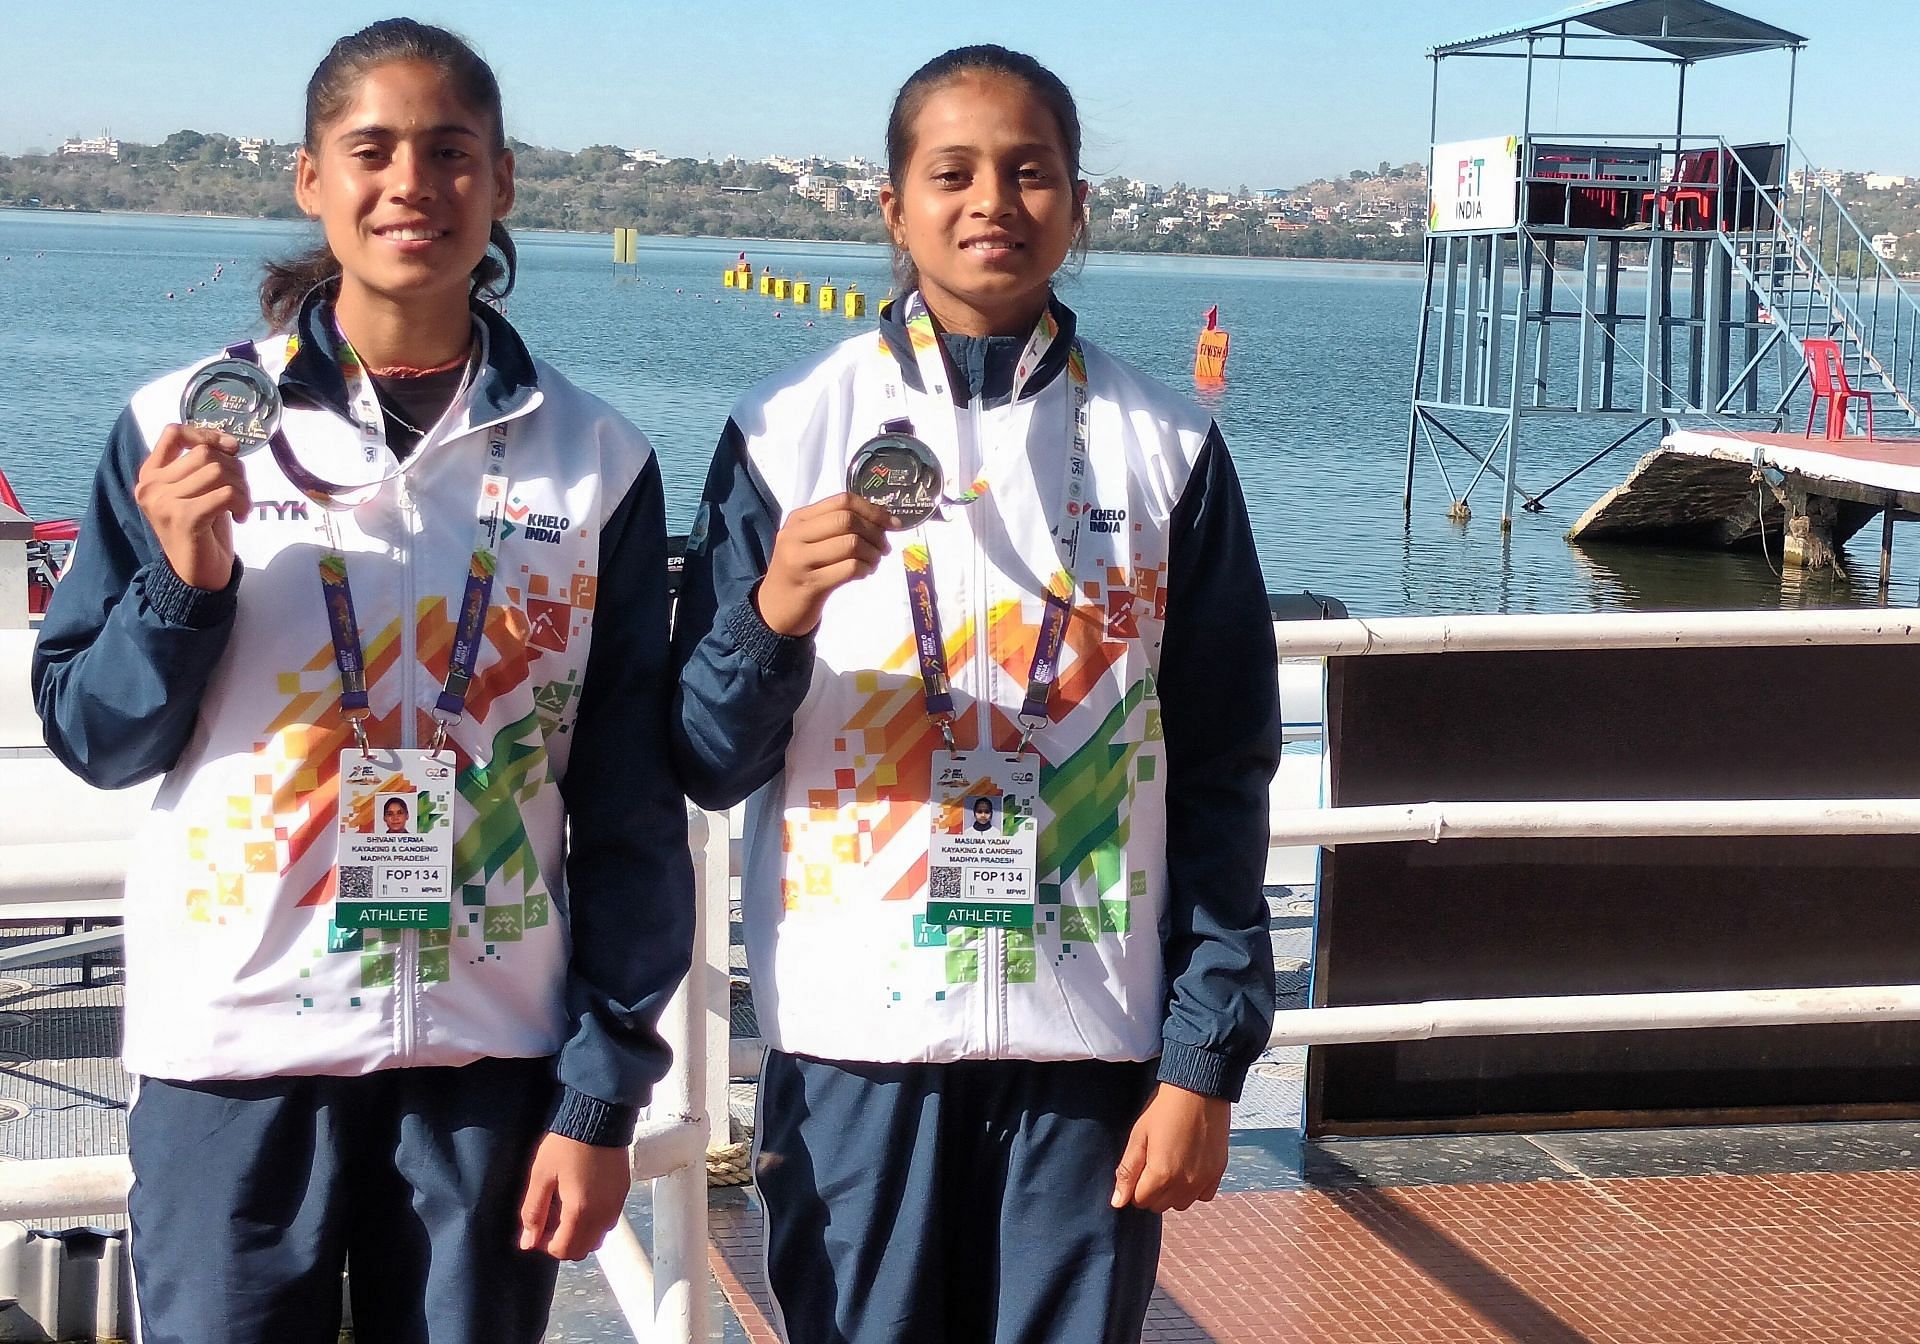 Shivani Verma (left) and Masuma Yadav won silver medal for Madhya Pradesh in the women&rsquo;s C-2 sprint canoe event at the Khelo India Youth Games on Thursday in Bhopal. Photo credit Navneet Singh